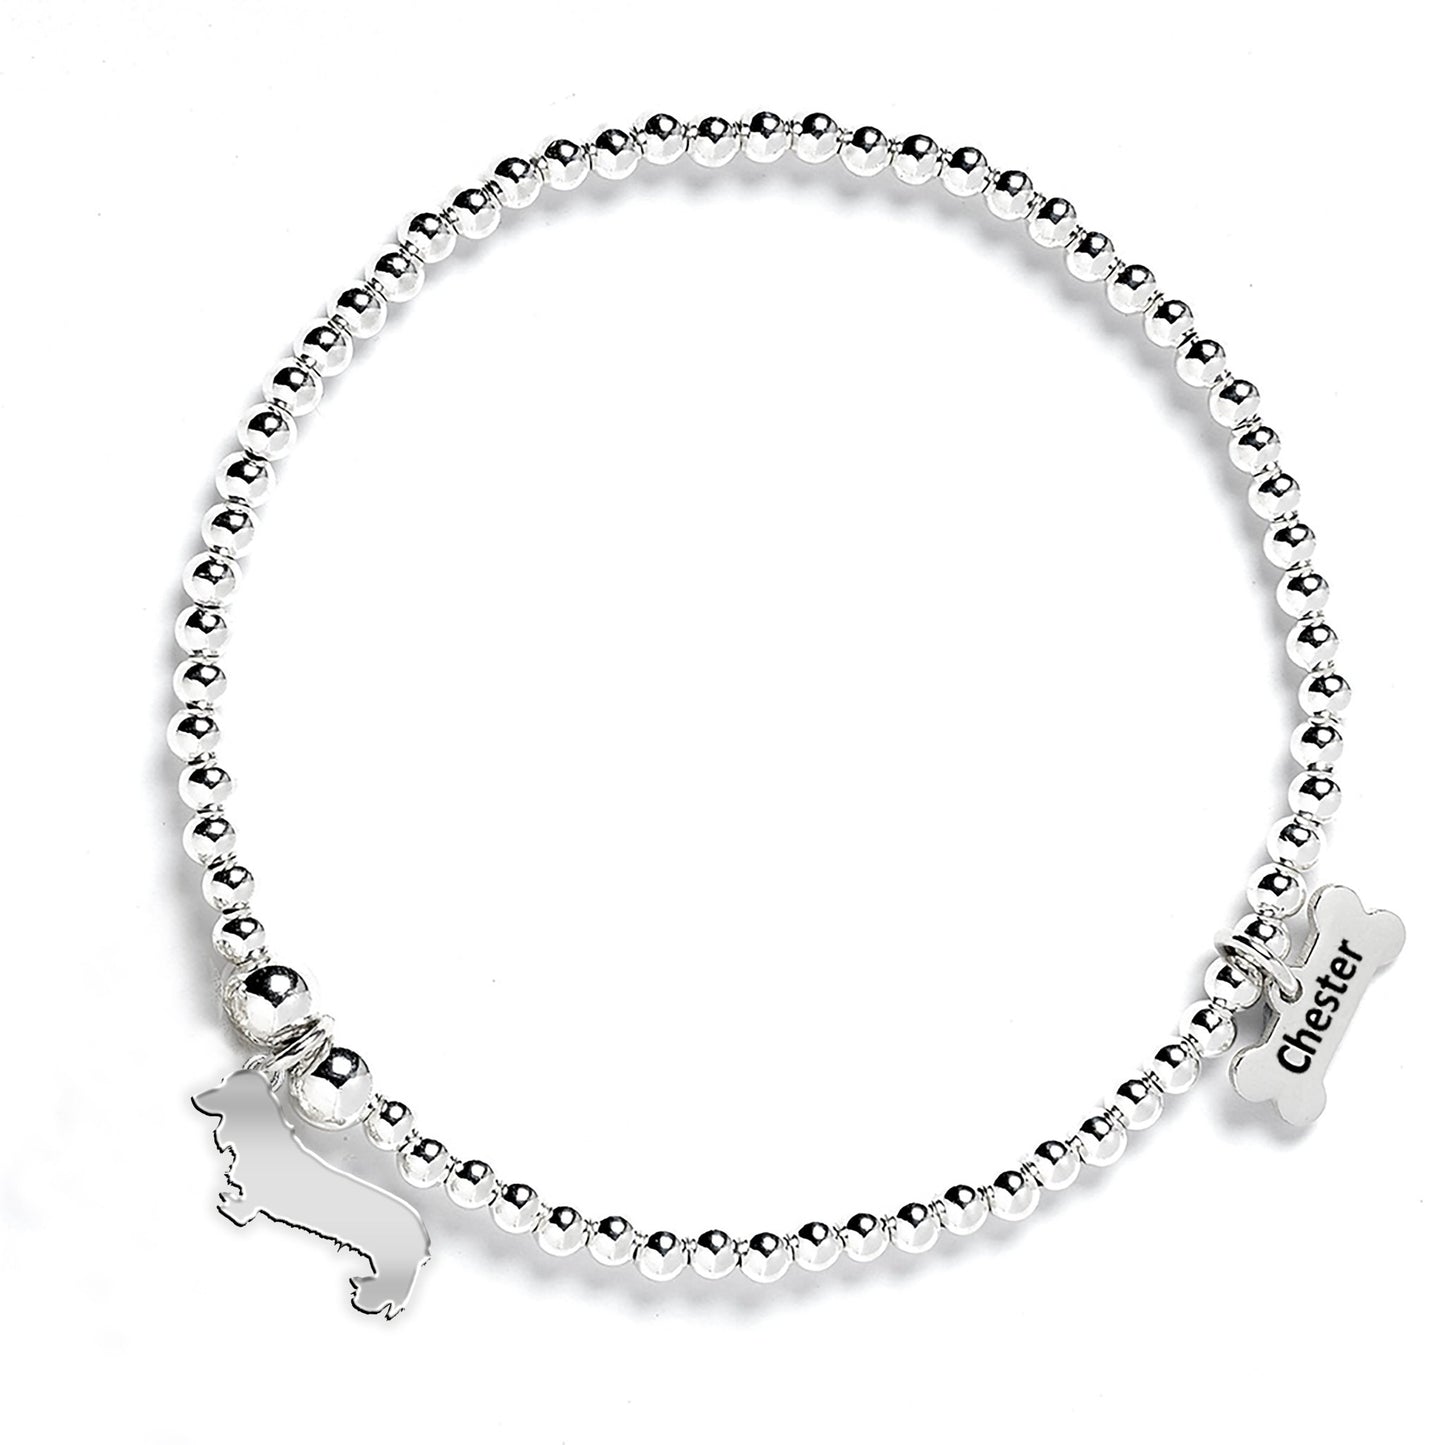 Long Haired Dachshund Silhouette Silver Ball Bead Bracelet - Personalised - MYLEE London